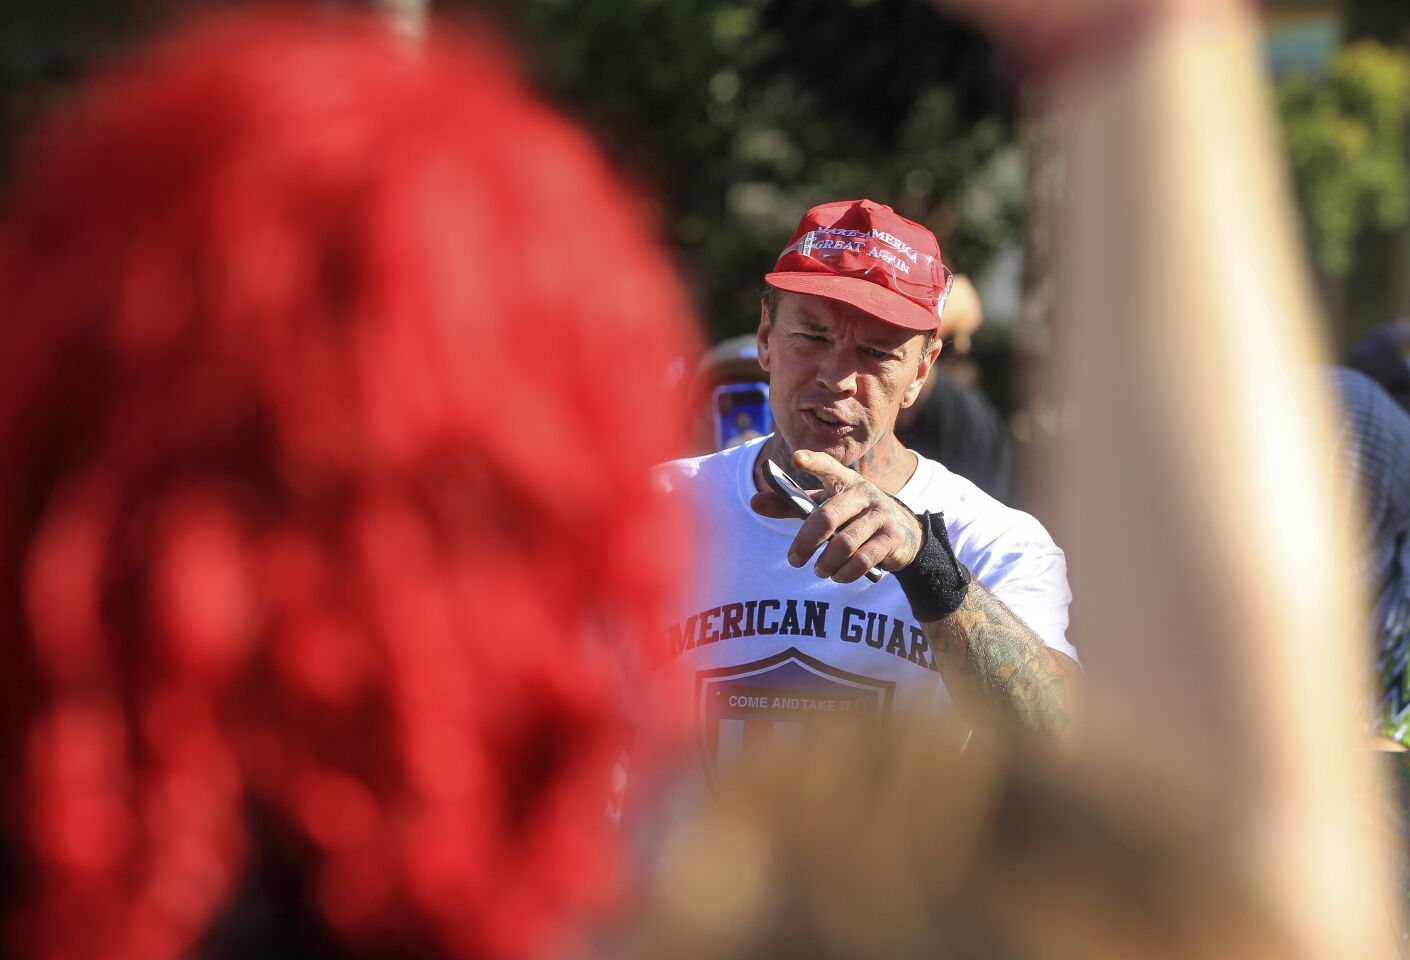 A man points toward supporters of the Drag Queen Story Hour while he stands with protesters against the story hour at the Chula Vista Public Library Civic Center Branch on Tuesday, September 10, 2019 in Chula Vista, California.